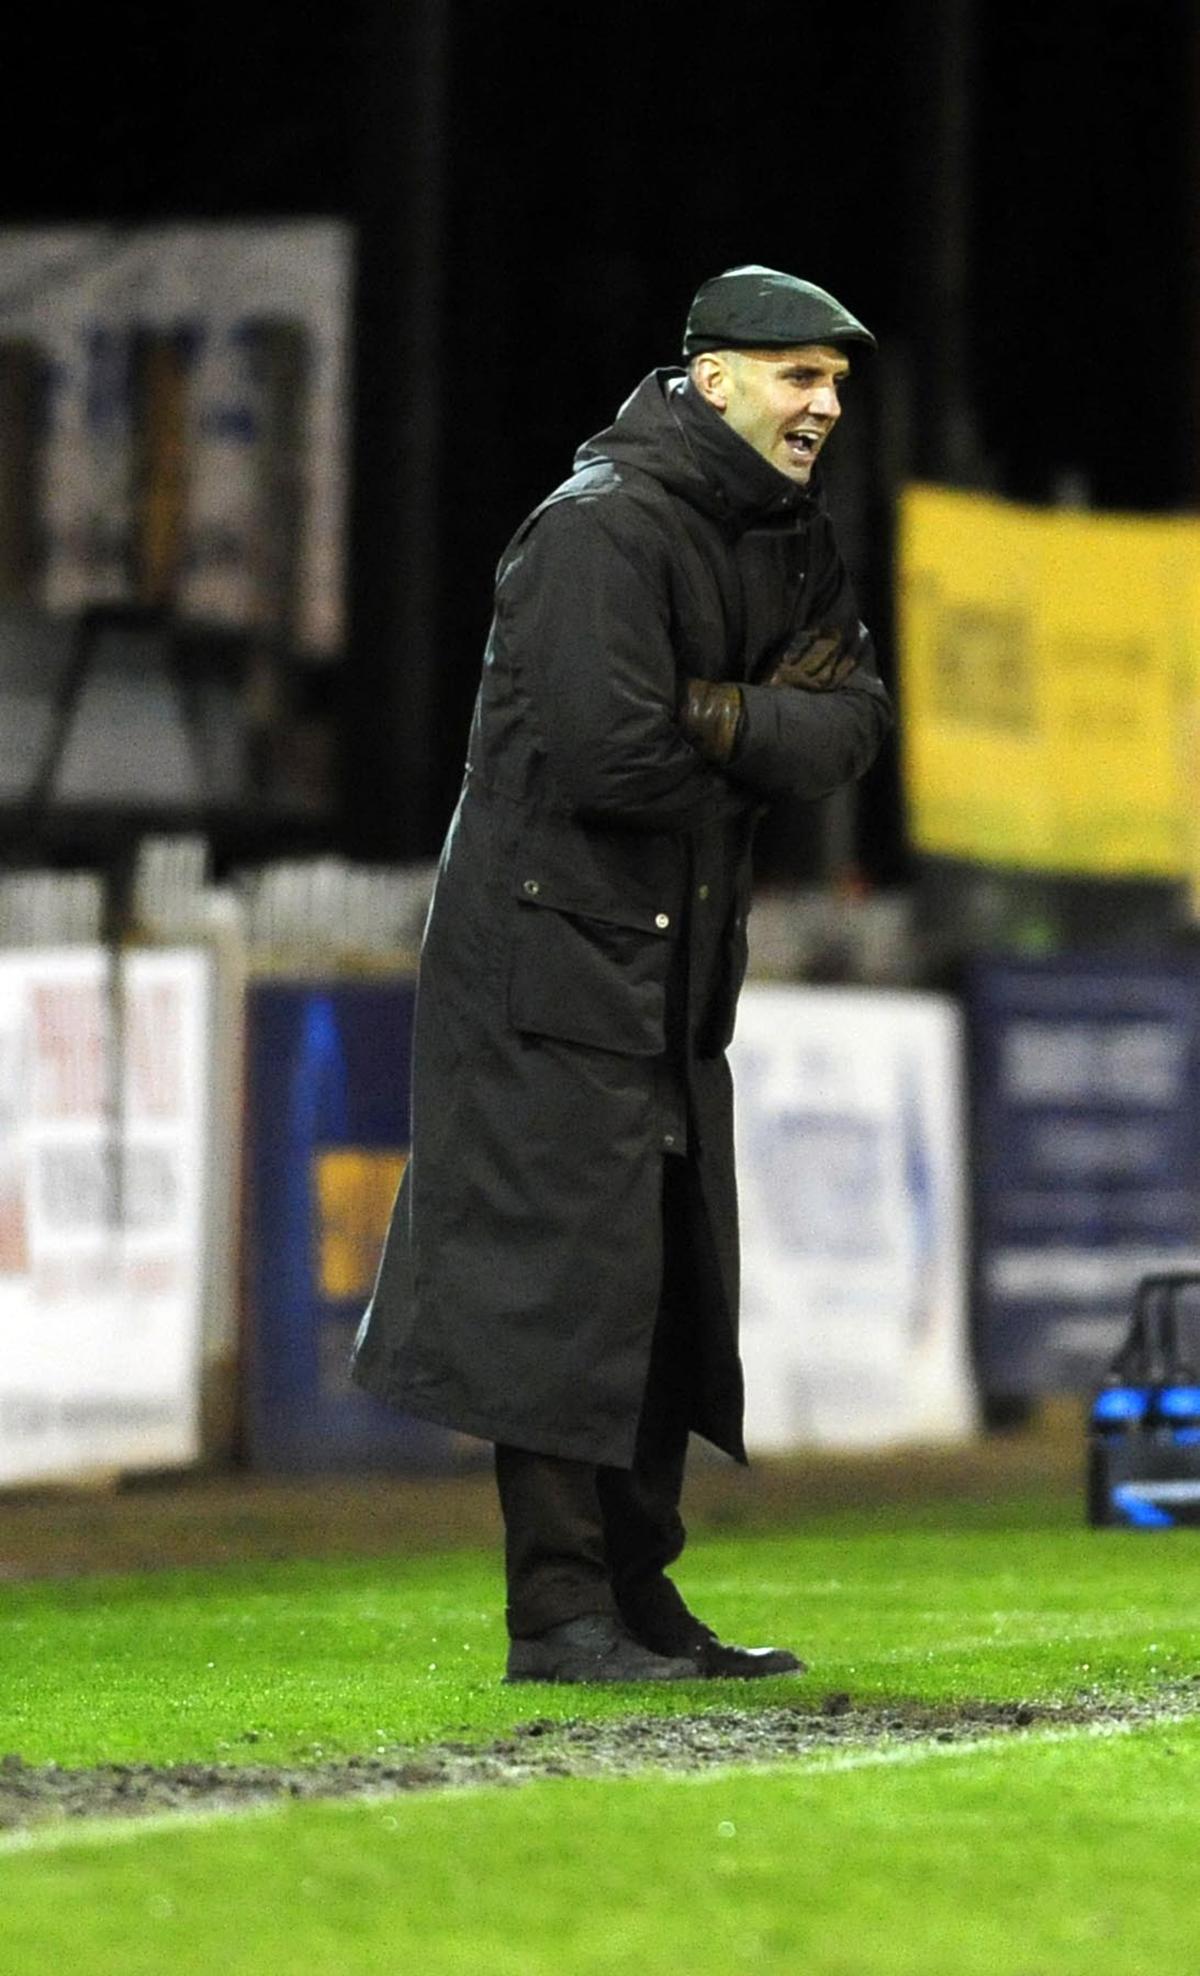 Pictures from Mickey Lewis' first game in charge as manager, a 0-0 away game at Exeter.